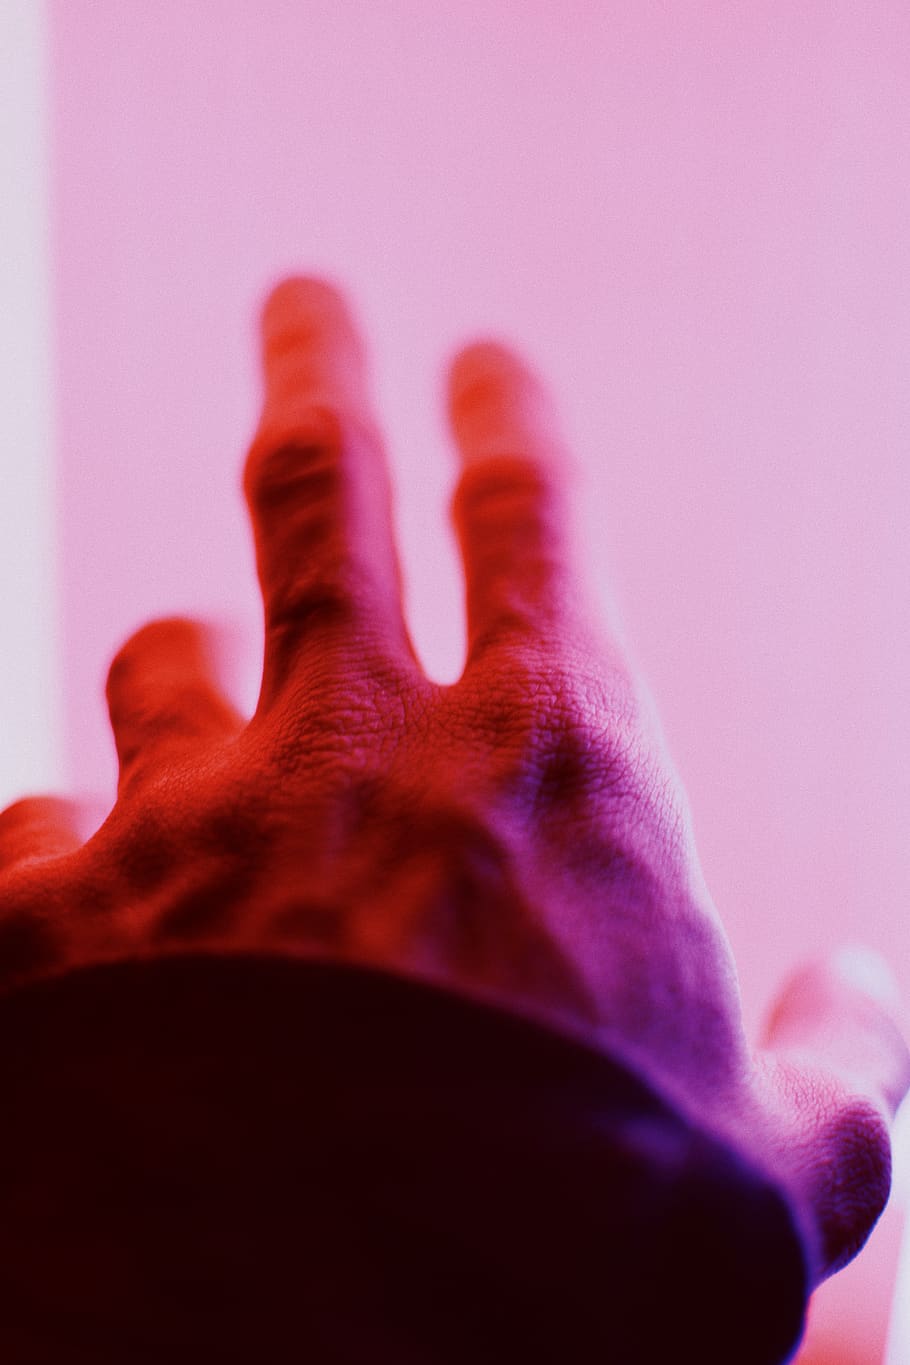 person trying to reach, human, finger, hand, wallpaper, background